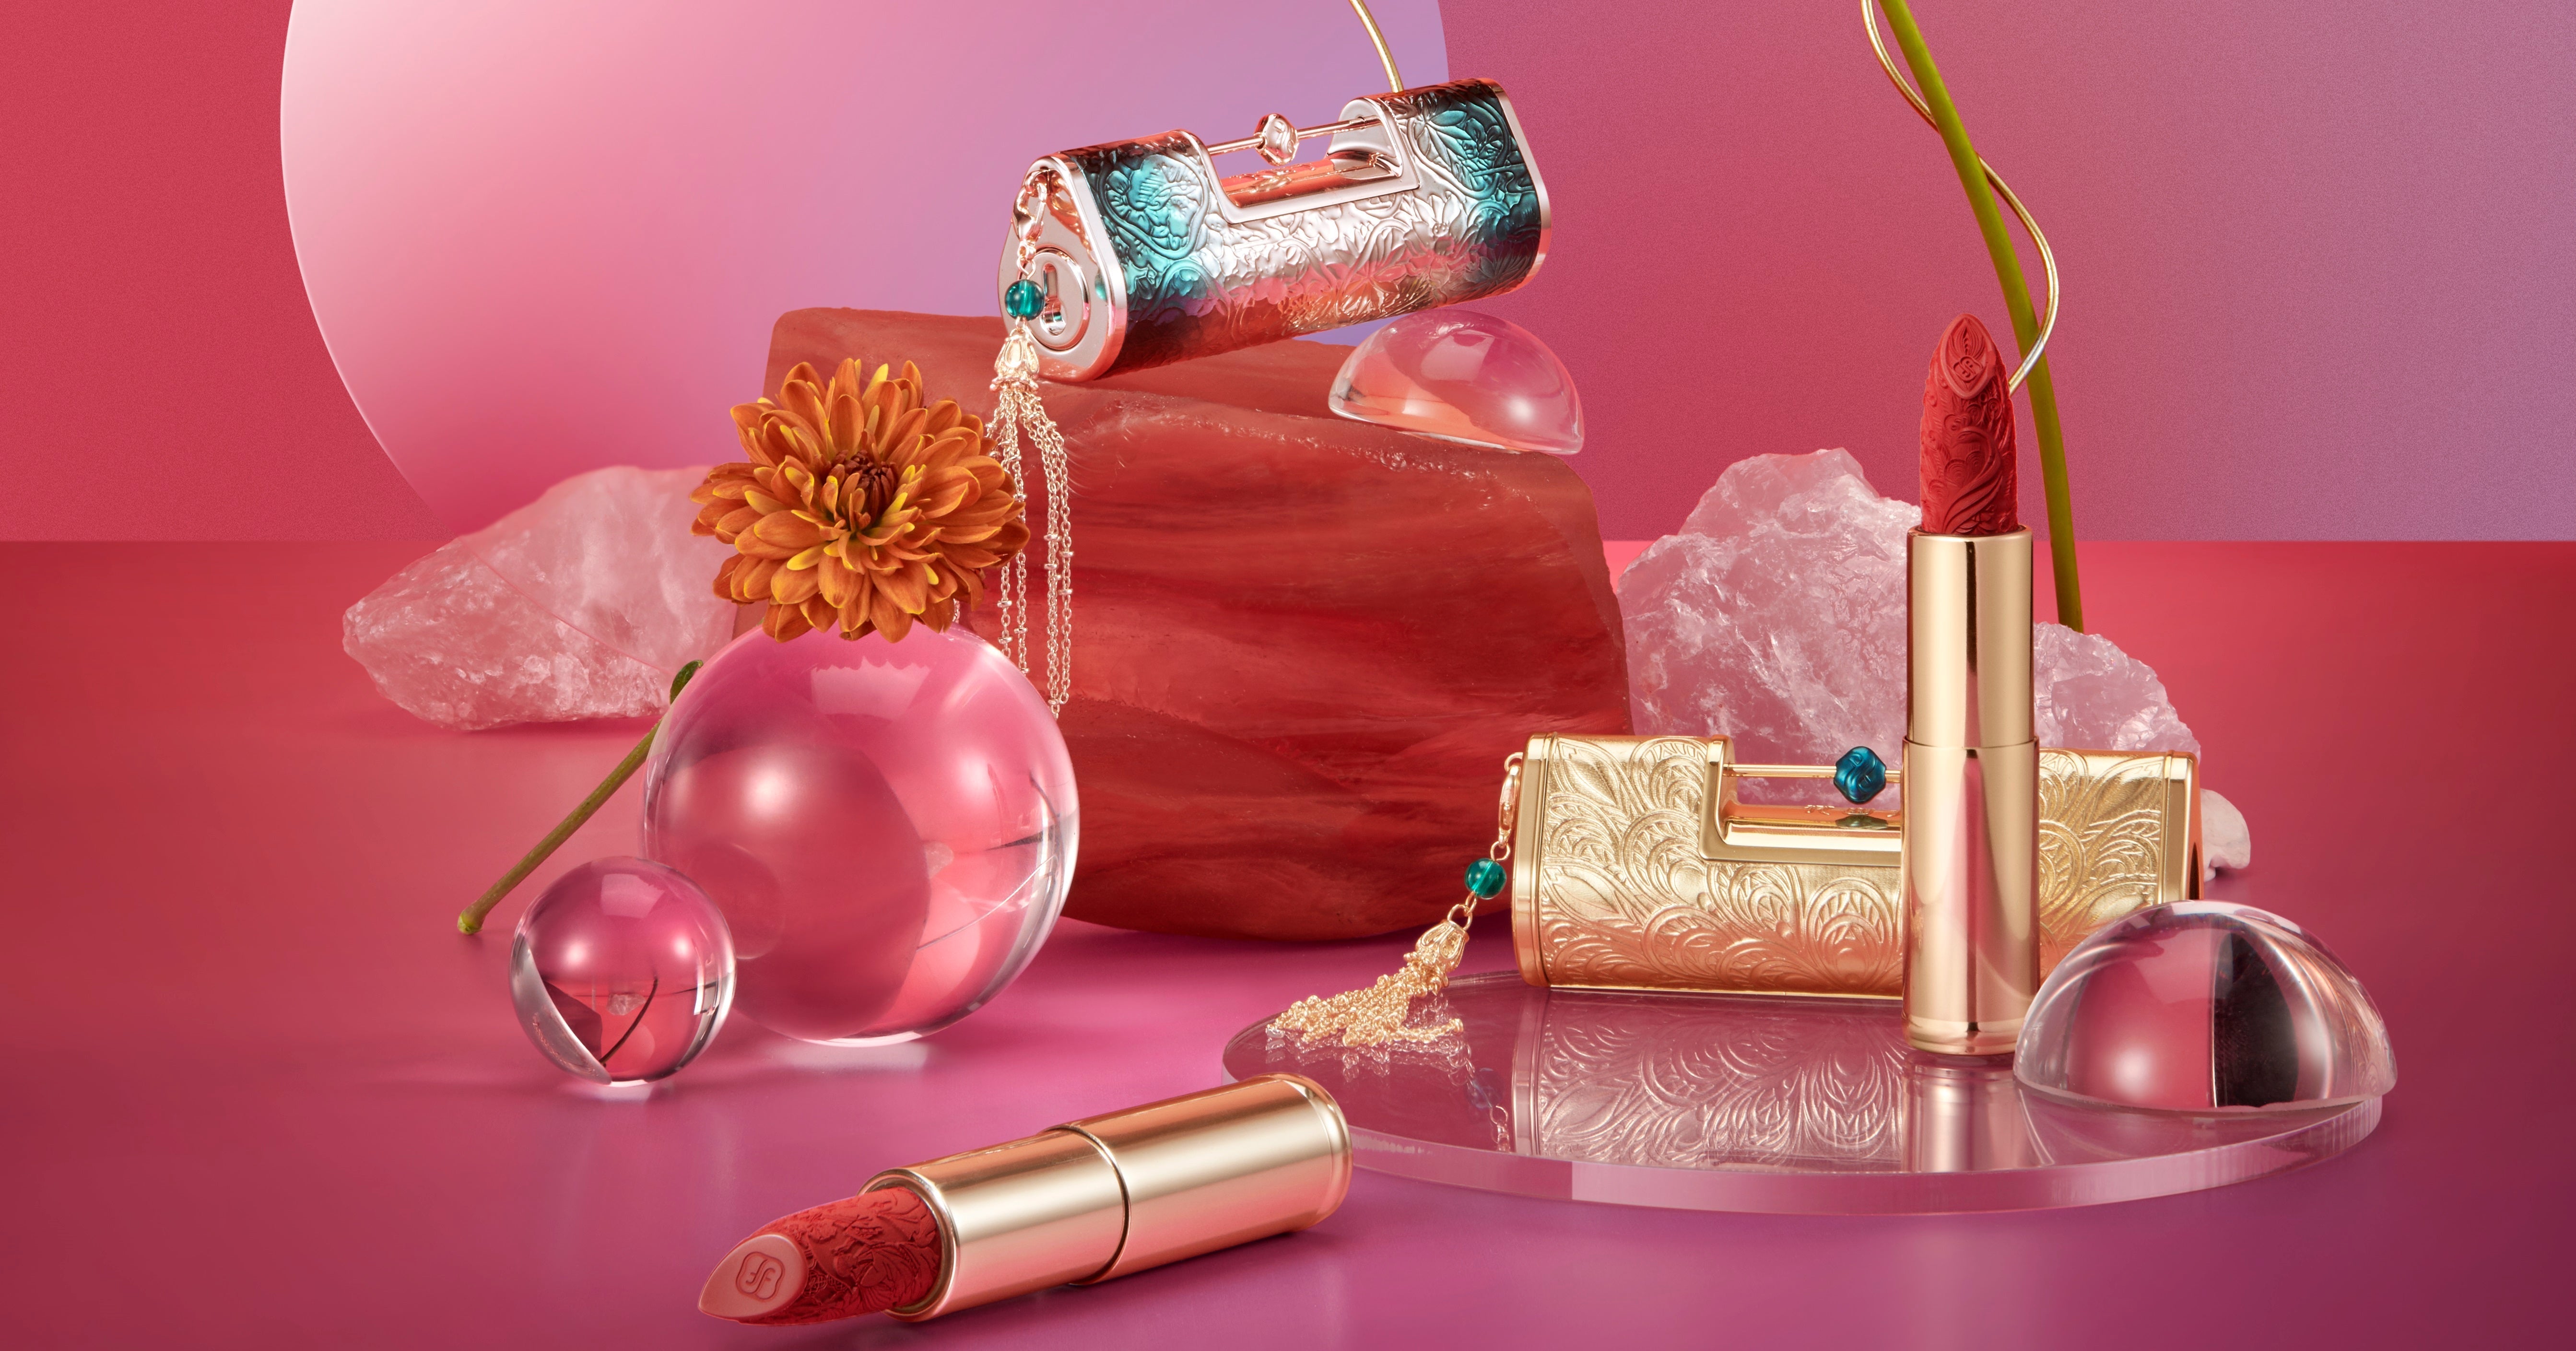 Engraved Masterpieces: Who’s That on Your Lipstick?